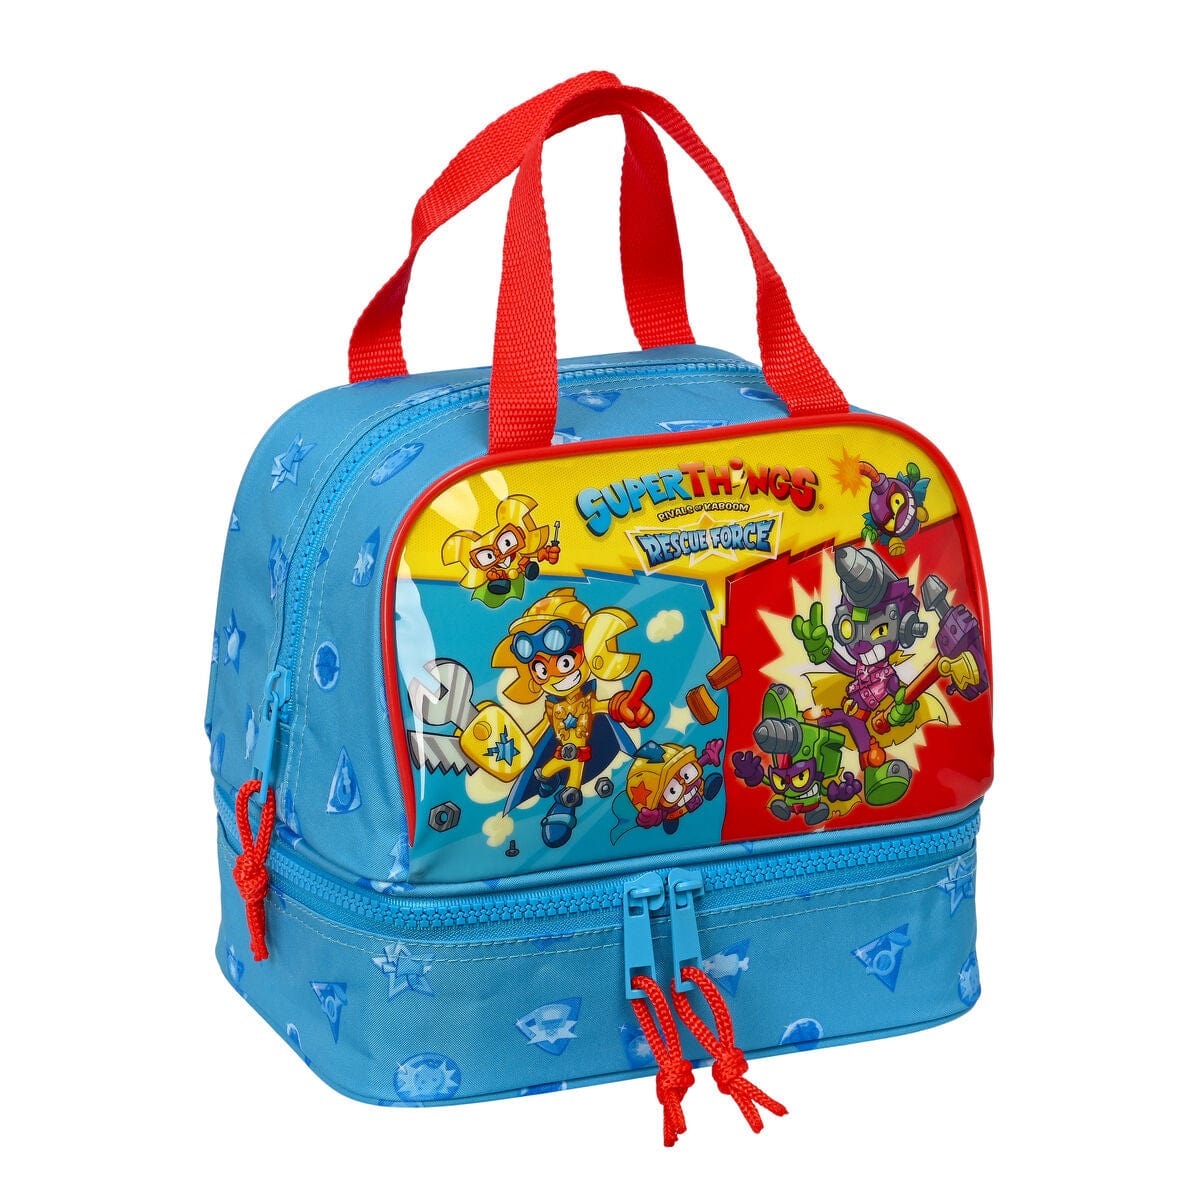 SuperThings Sport | Fitness > Camping und Berge > Tragbare Kühlboxen Lunchbox SuperThings Rescue force Blau 20 x 20 x 15 cm